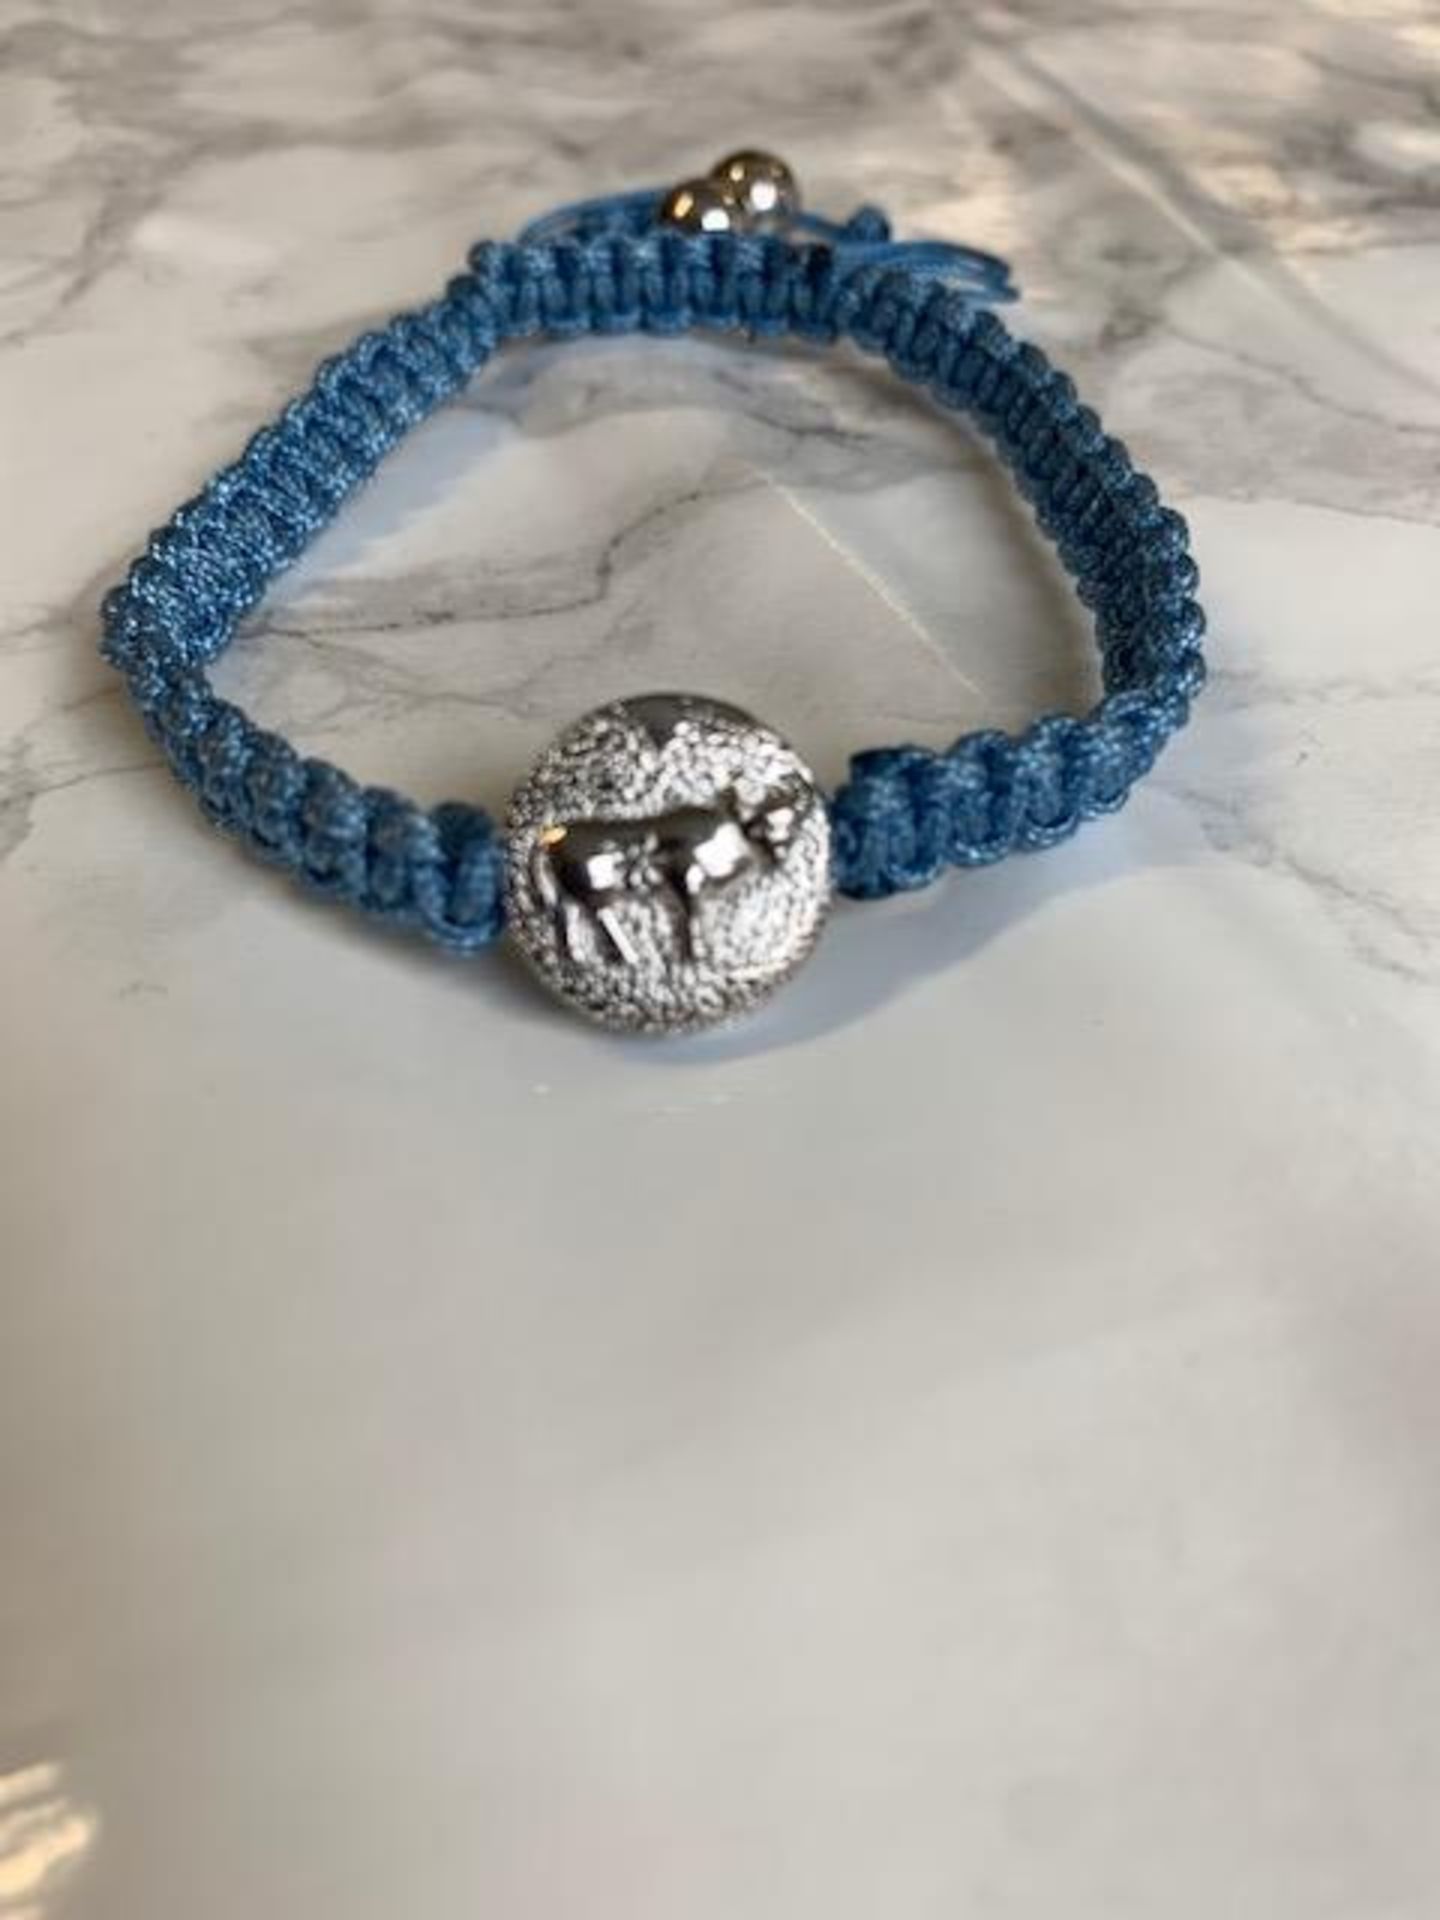 19 x Ox (Silver Bead Ends) Chinese Zodiac Year Adjustable Blue Beaded Bracelet